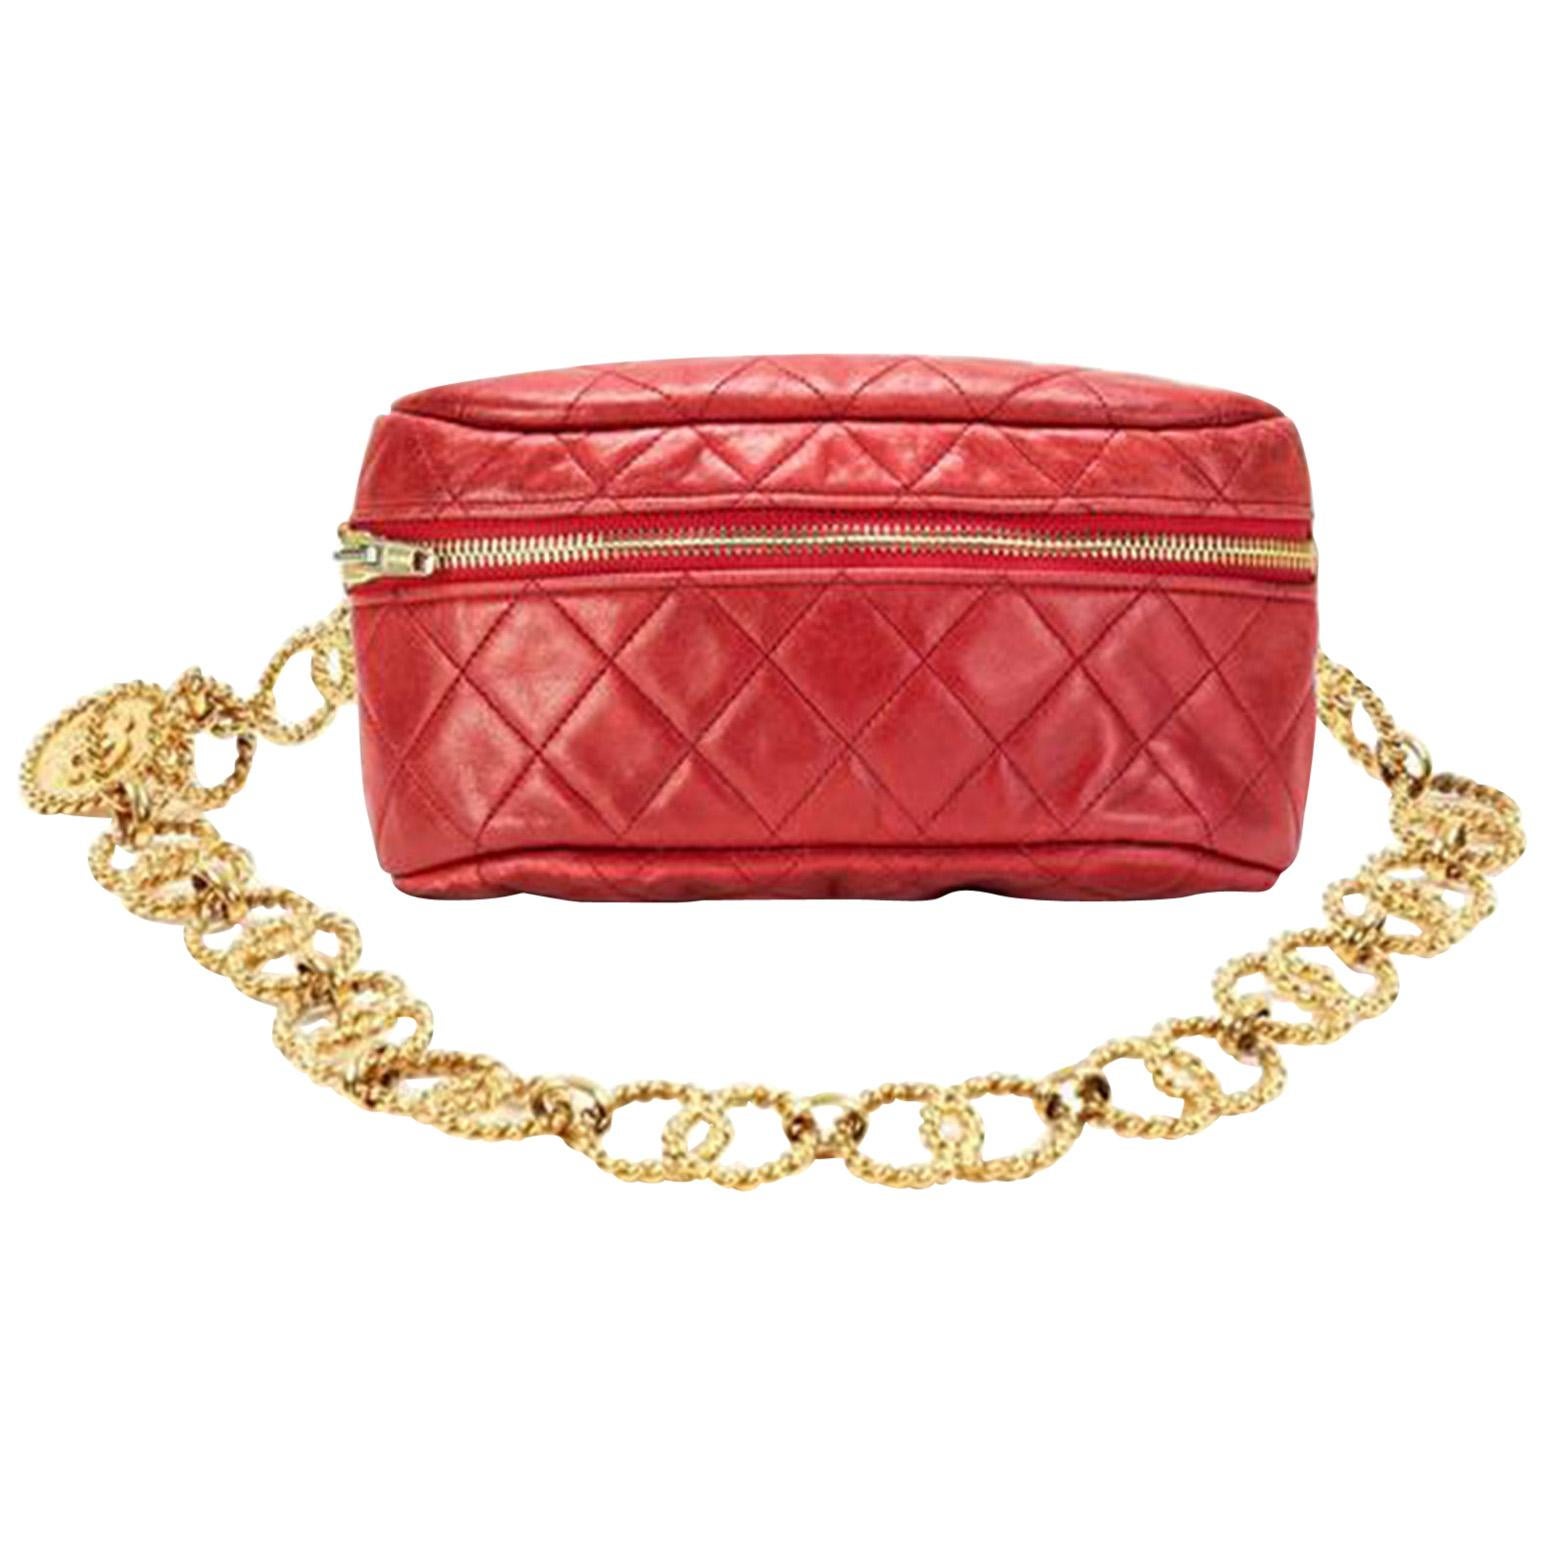 Chanel Waist Fanny Pack Vintage Rare Gold Chain Collector's Piece Red Belt Bag